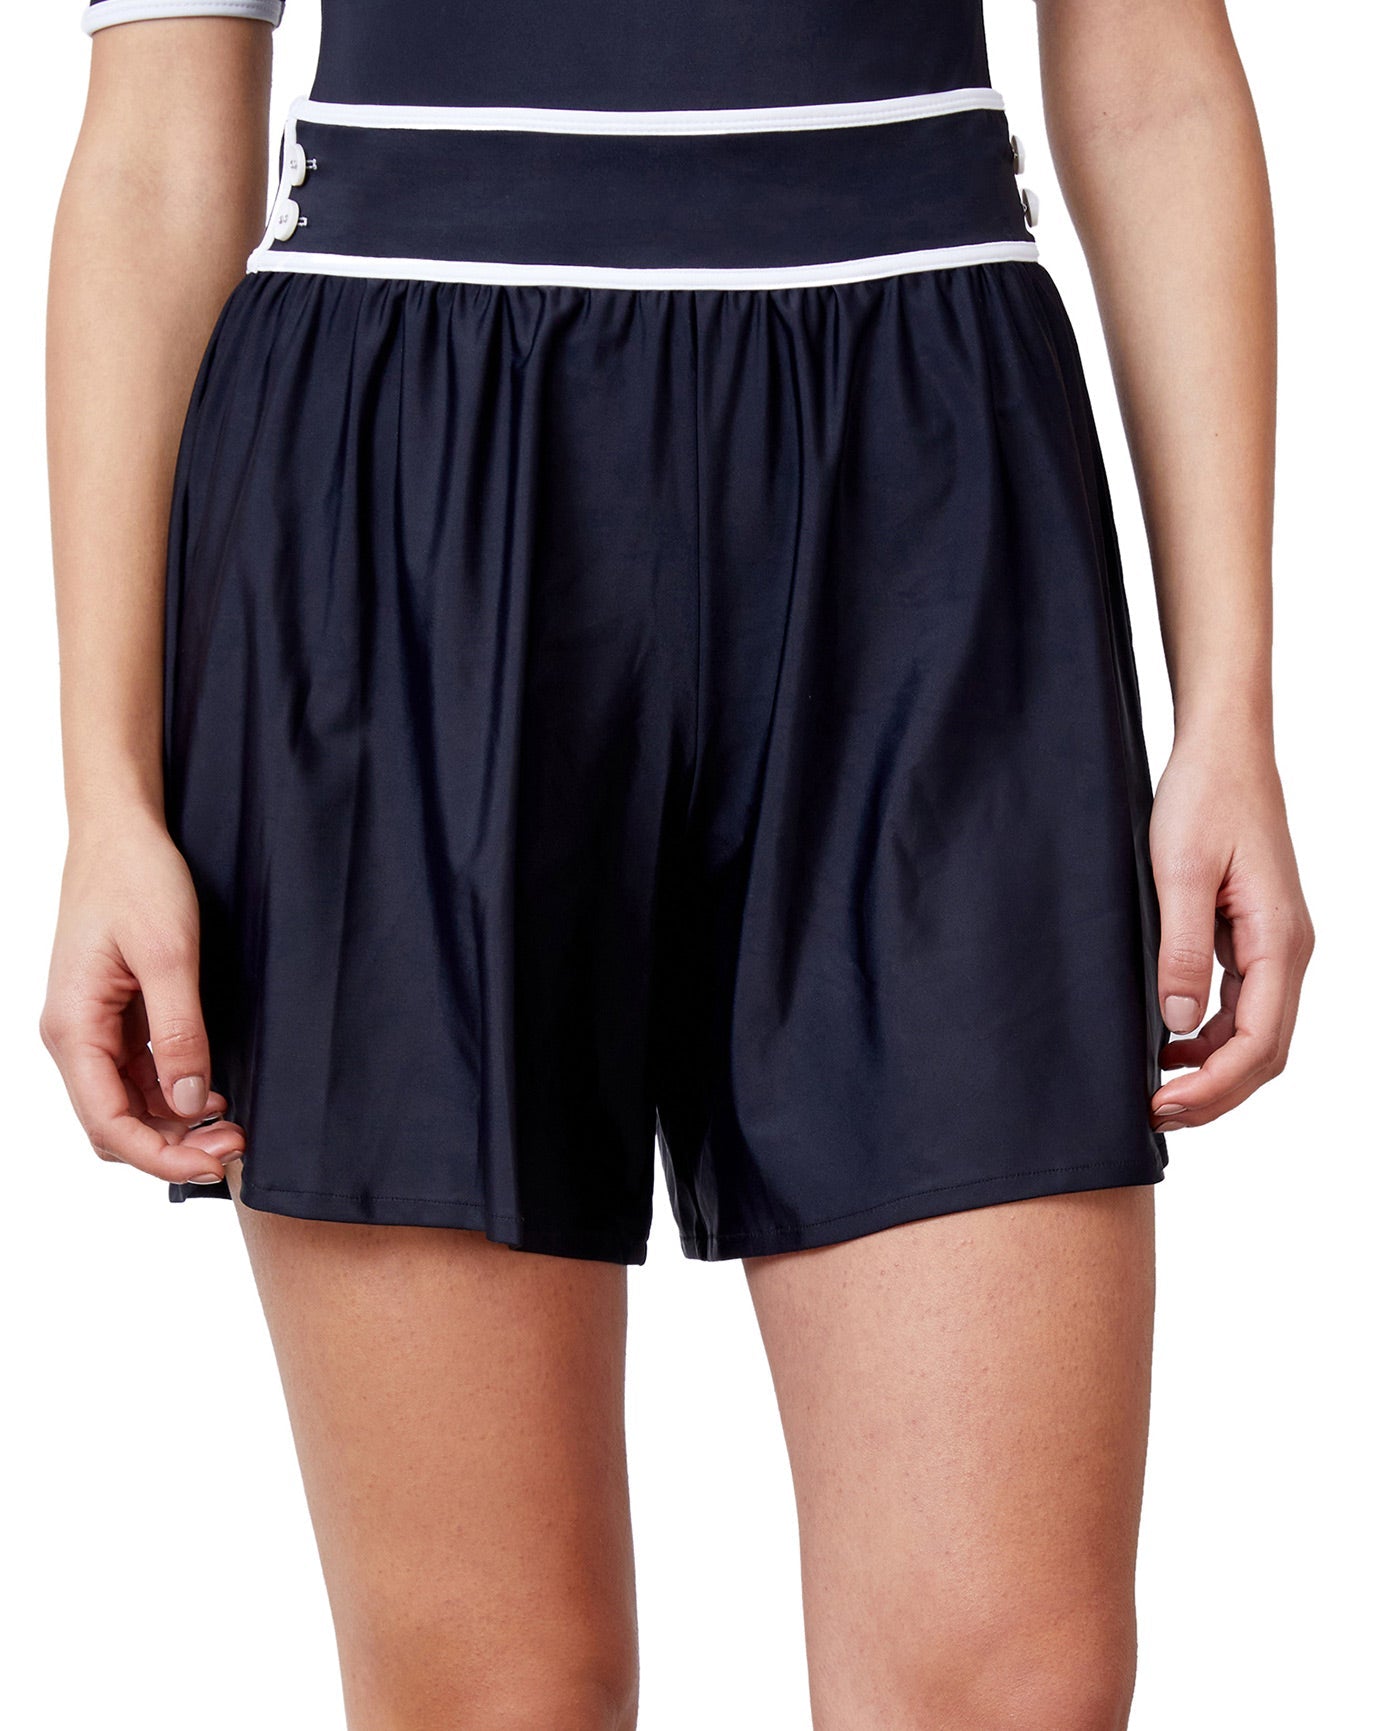 Gottex Modest Cover Up Shorts